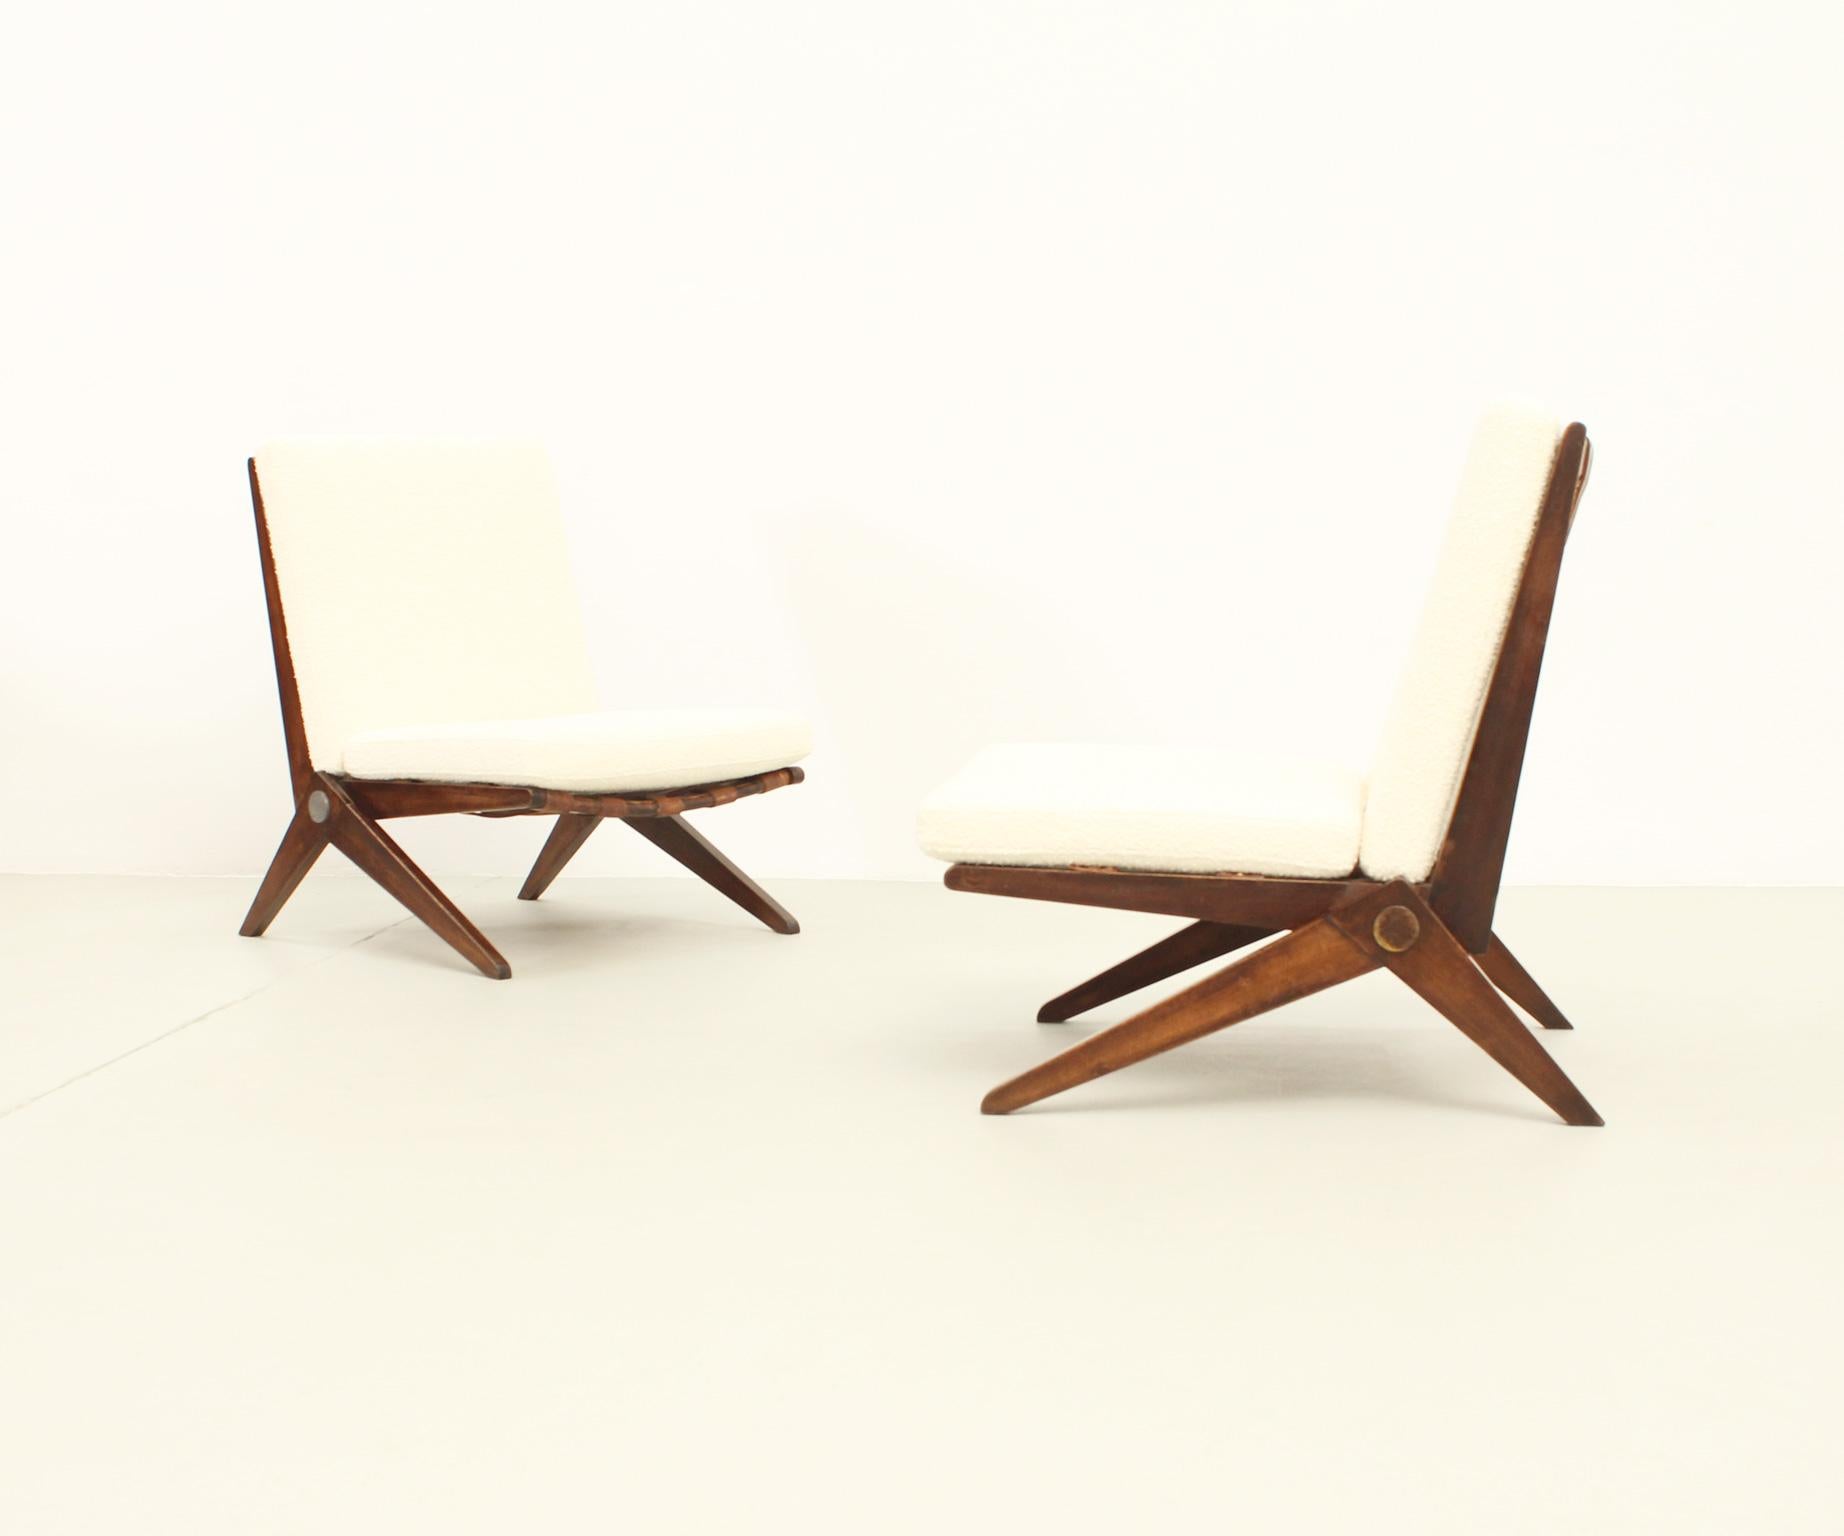 Mid-Century Modern Pair of Scissors Chairs by Pierre Jeanneret for Knoll, 1948